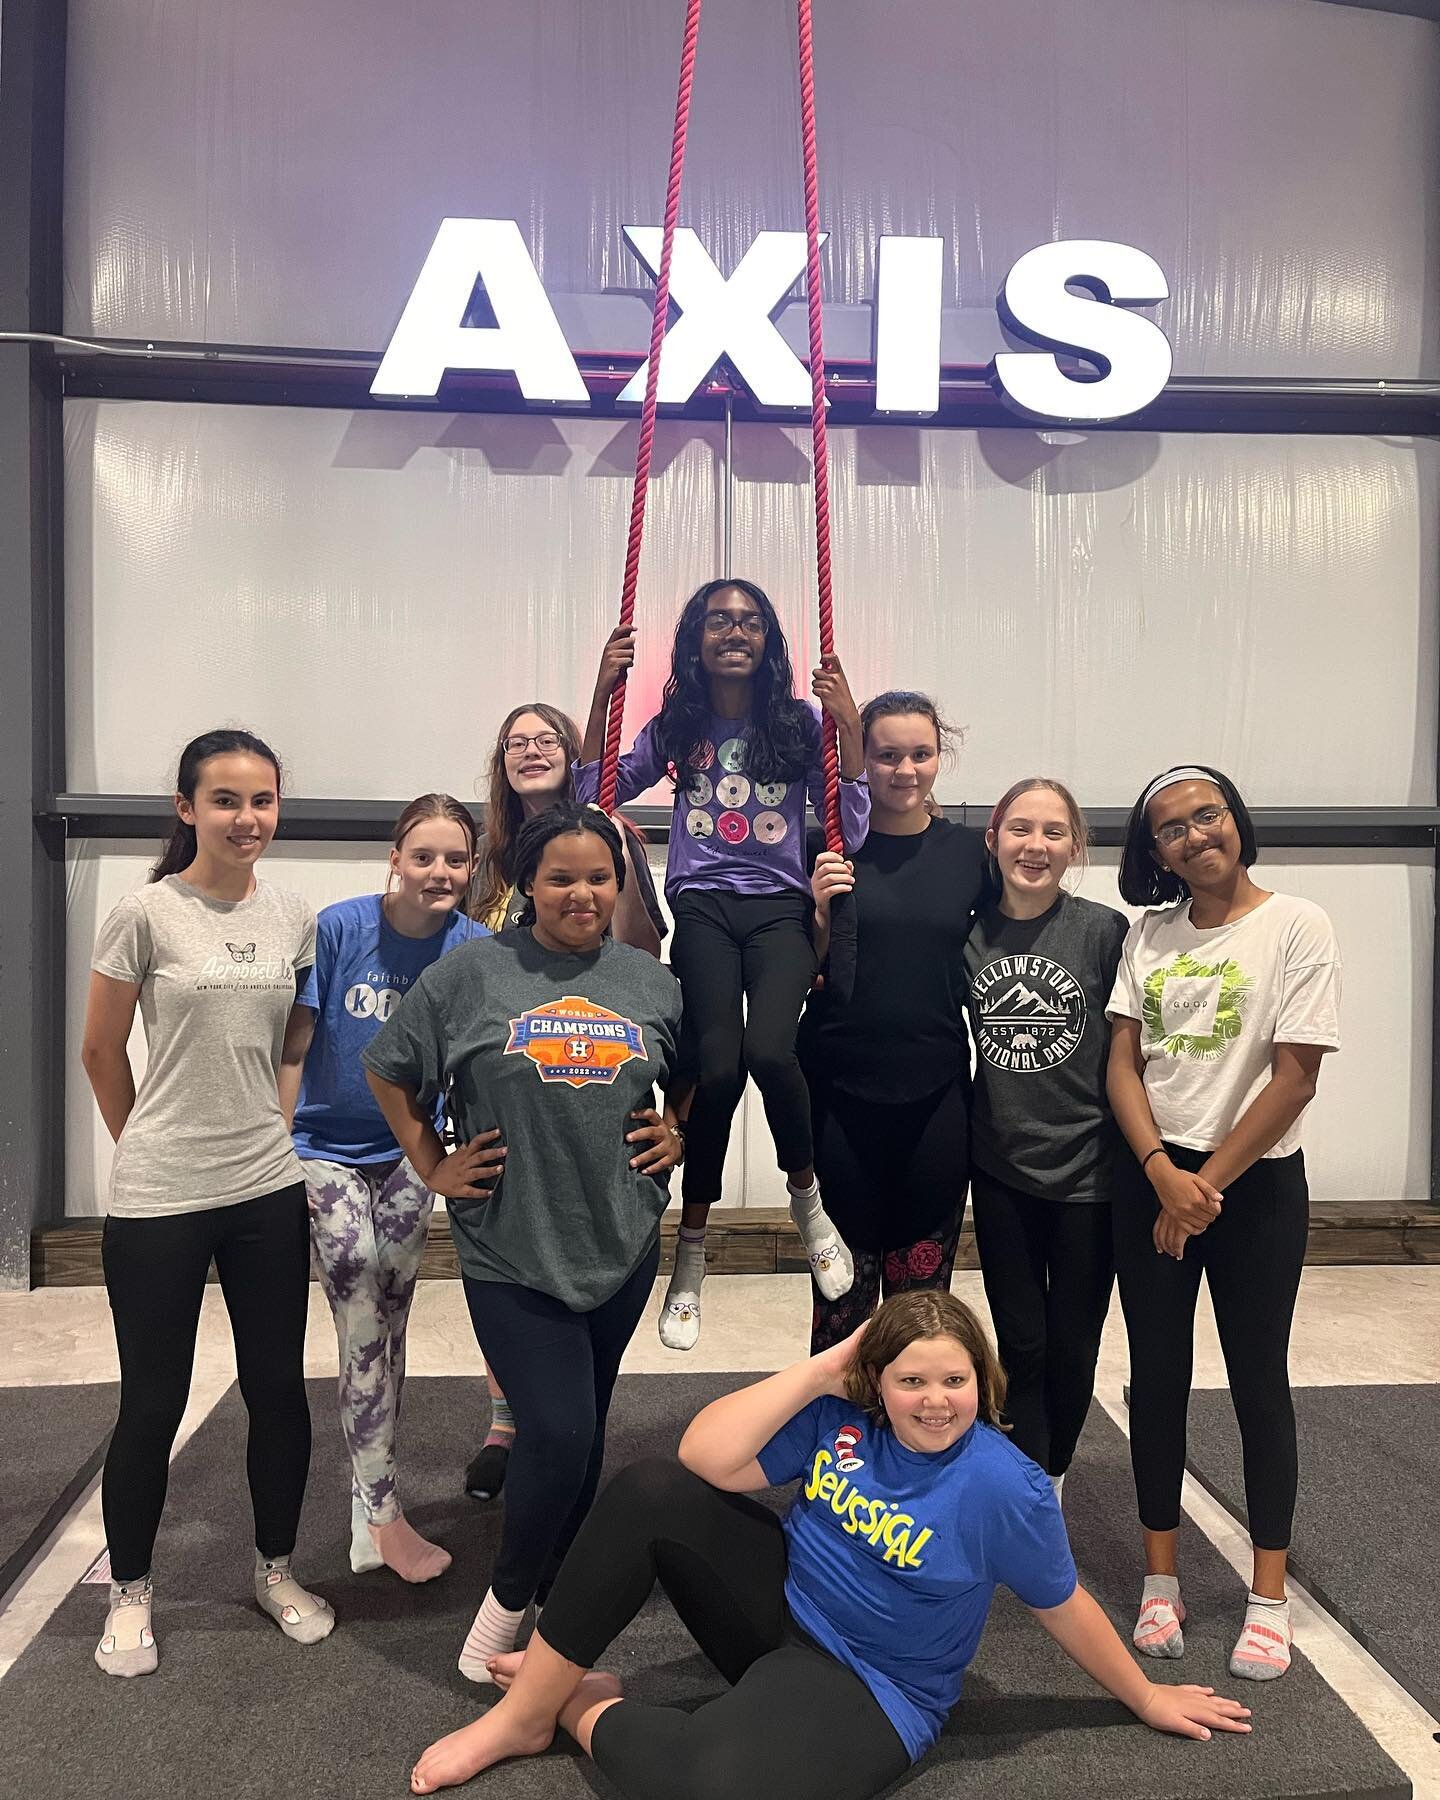 Girl Scout bonding party at Axis was a blast! 🦋
&bull;
&bull;
&bull;
#axisaerialarts #teambonding #partyideasforkids #partyinspiration #partytime #tomballtx #tomballtexas #littleaerialist #partykids